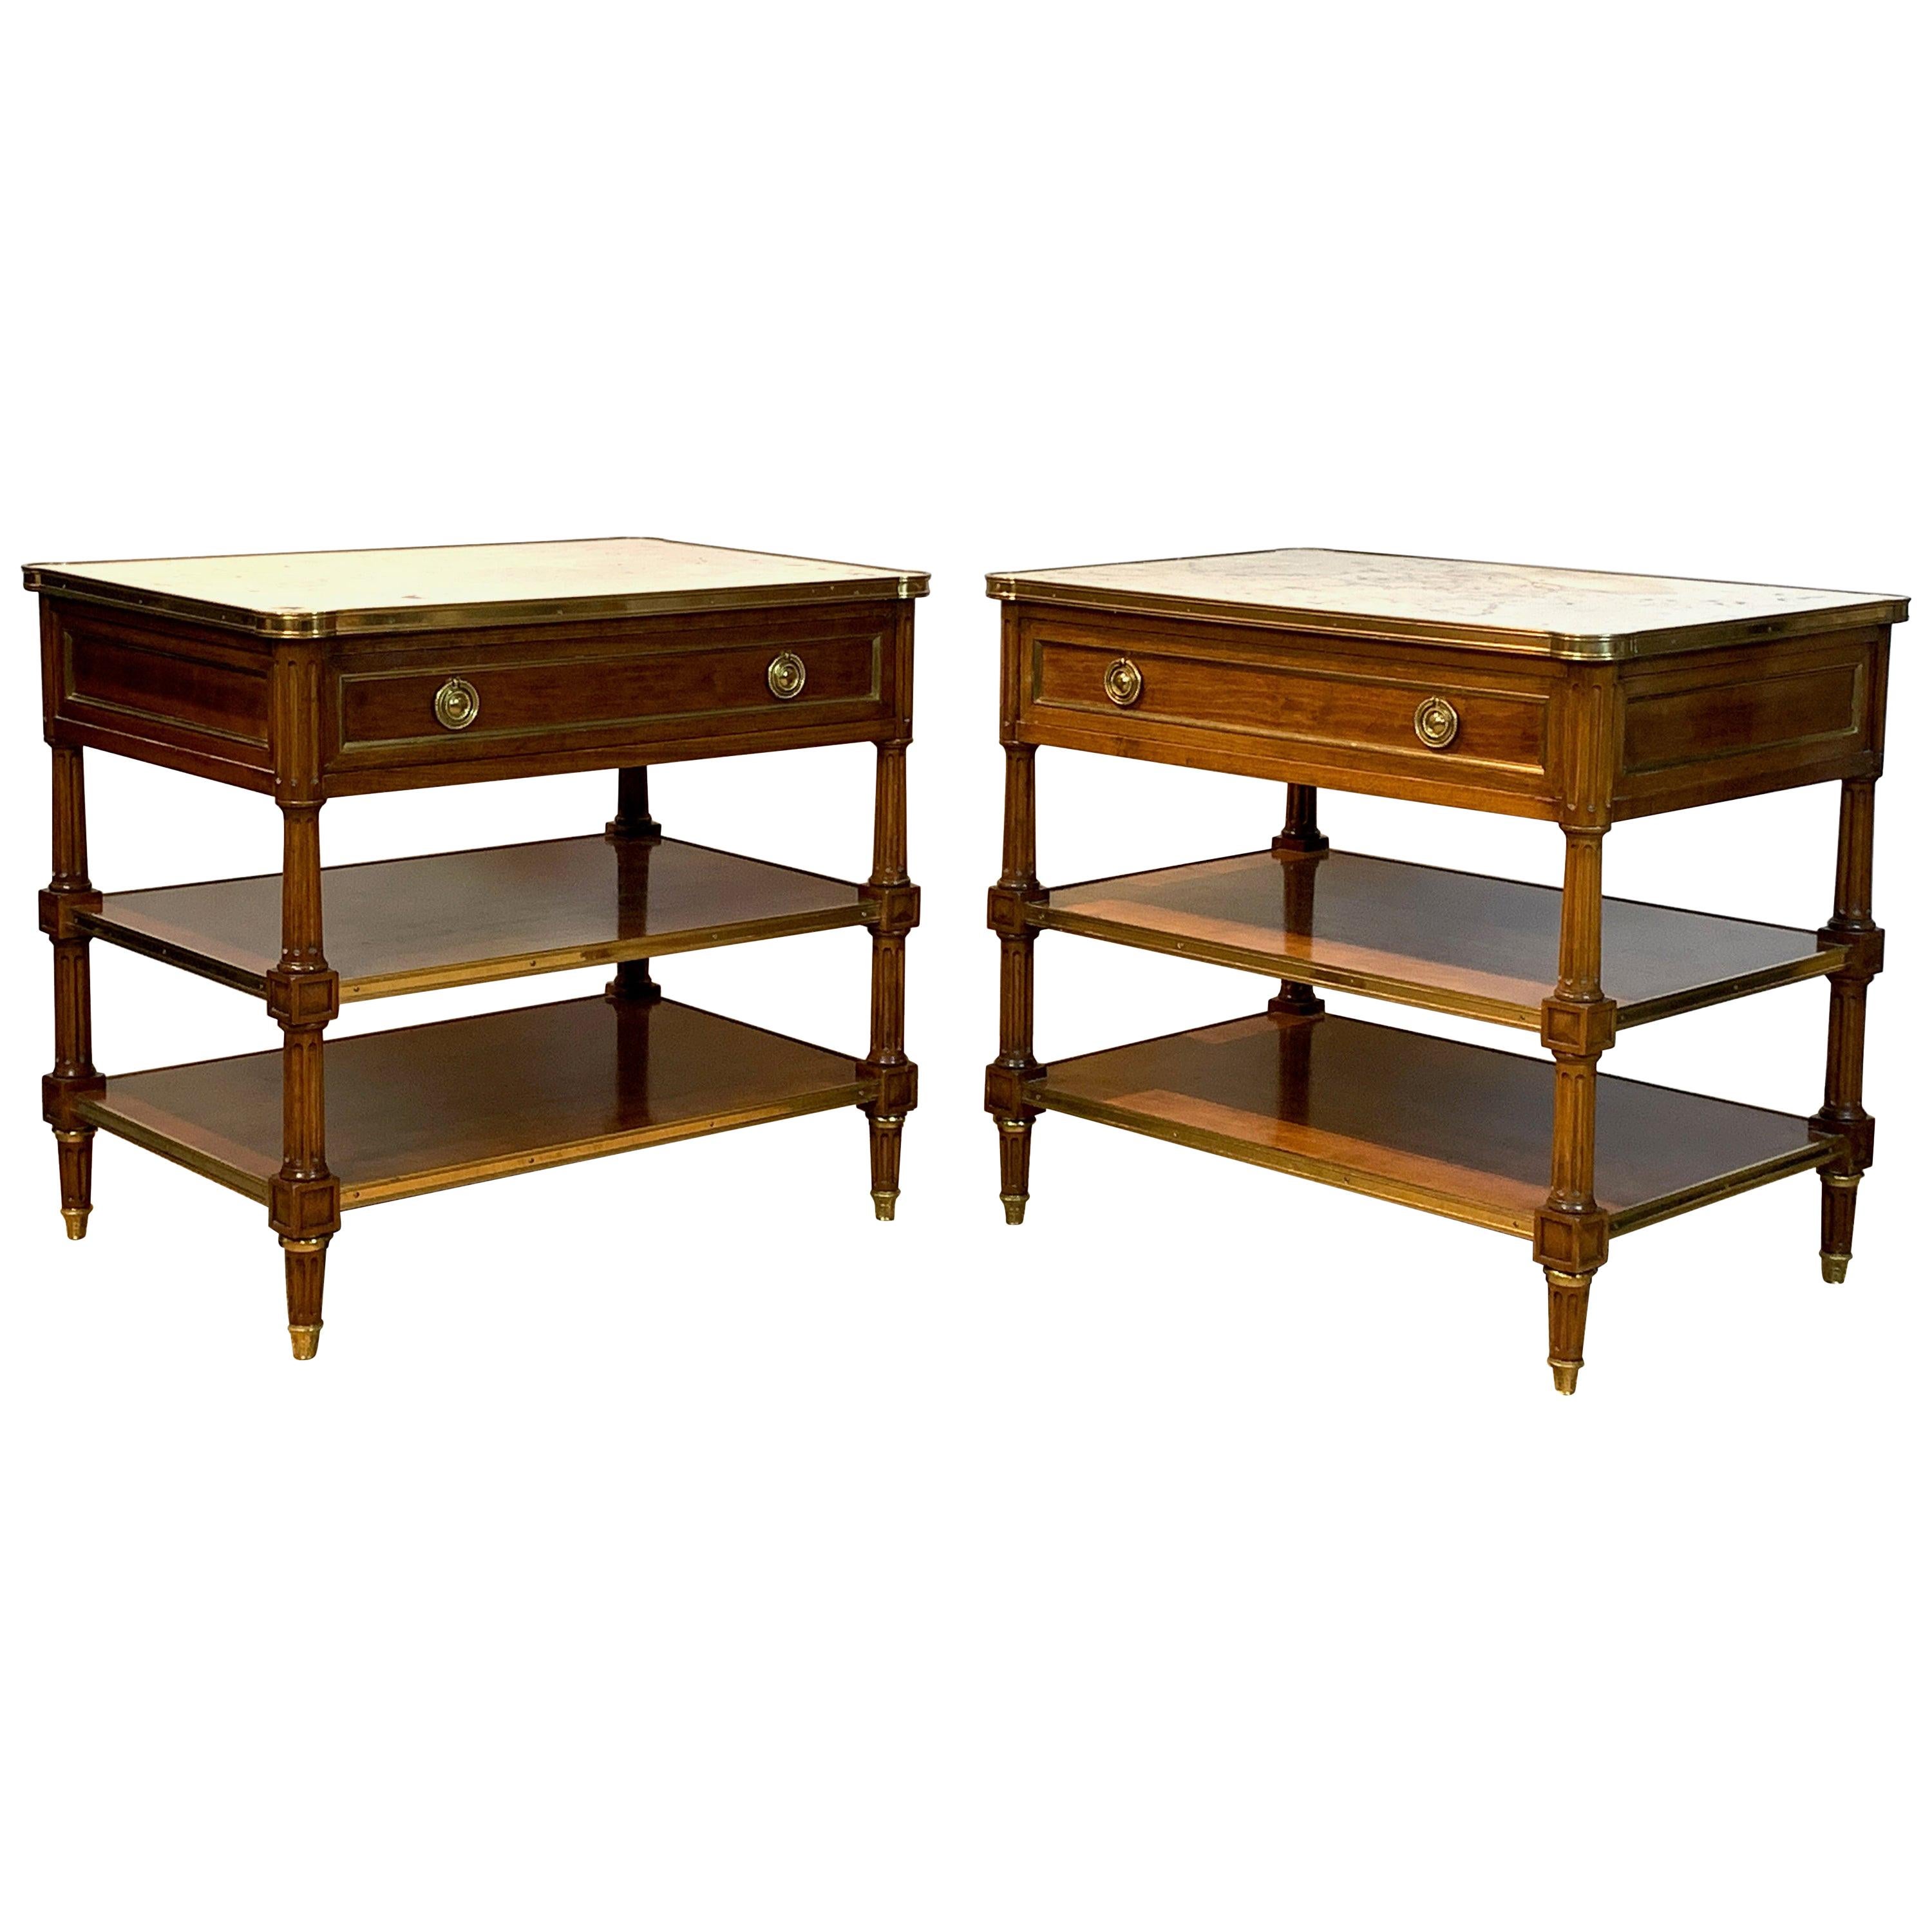 Pair of Louis XVI Style Side Tables